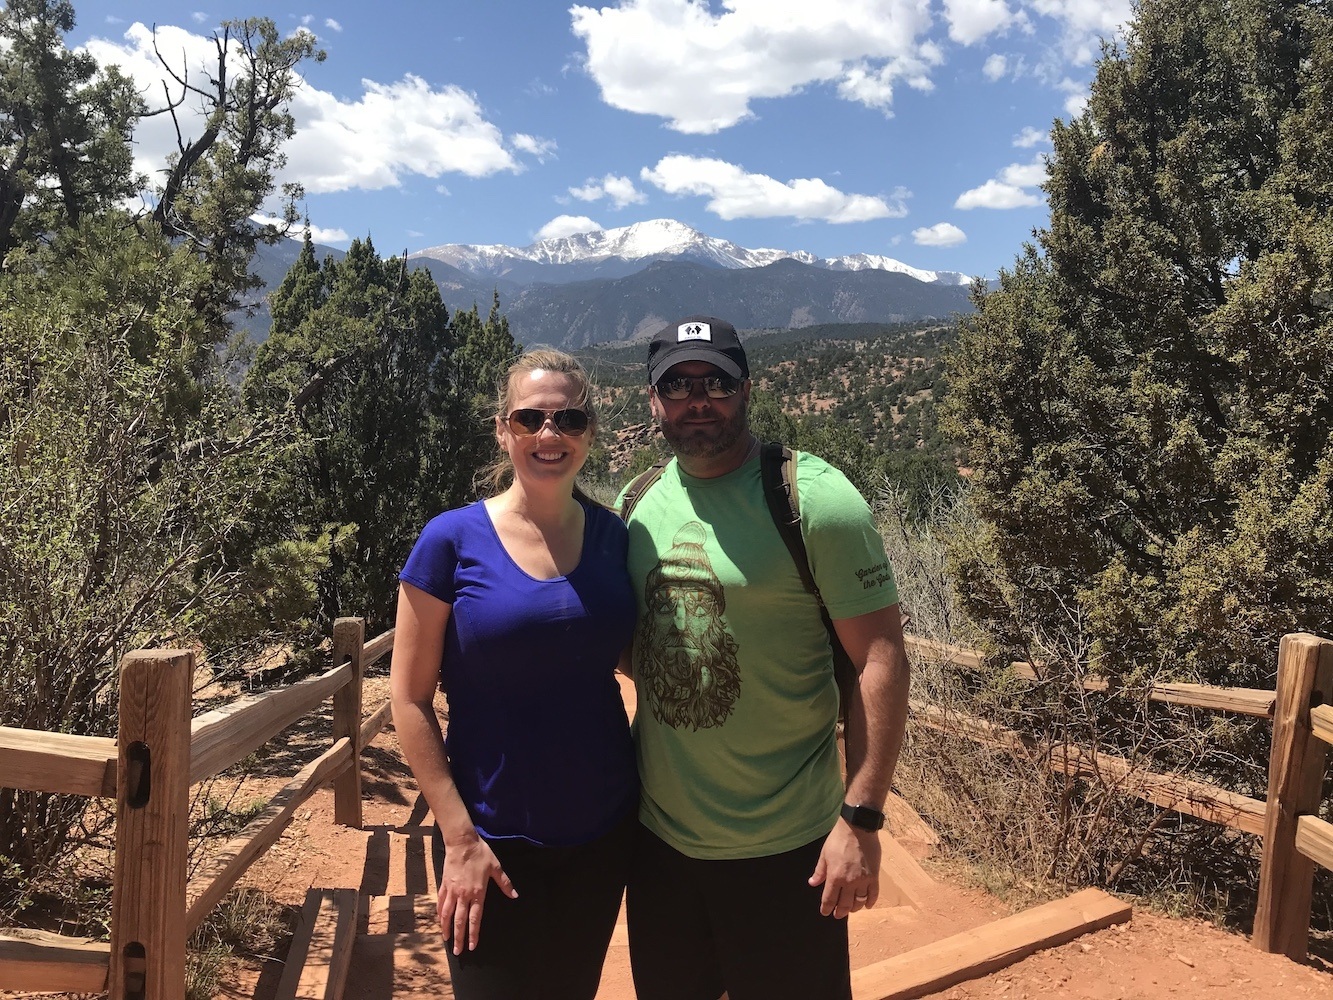 Jason and his wife hiking